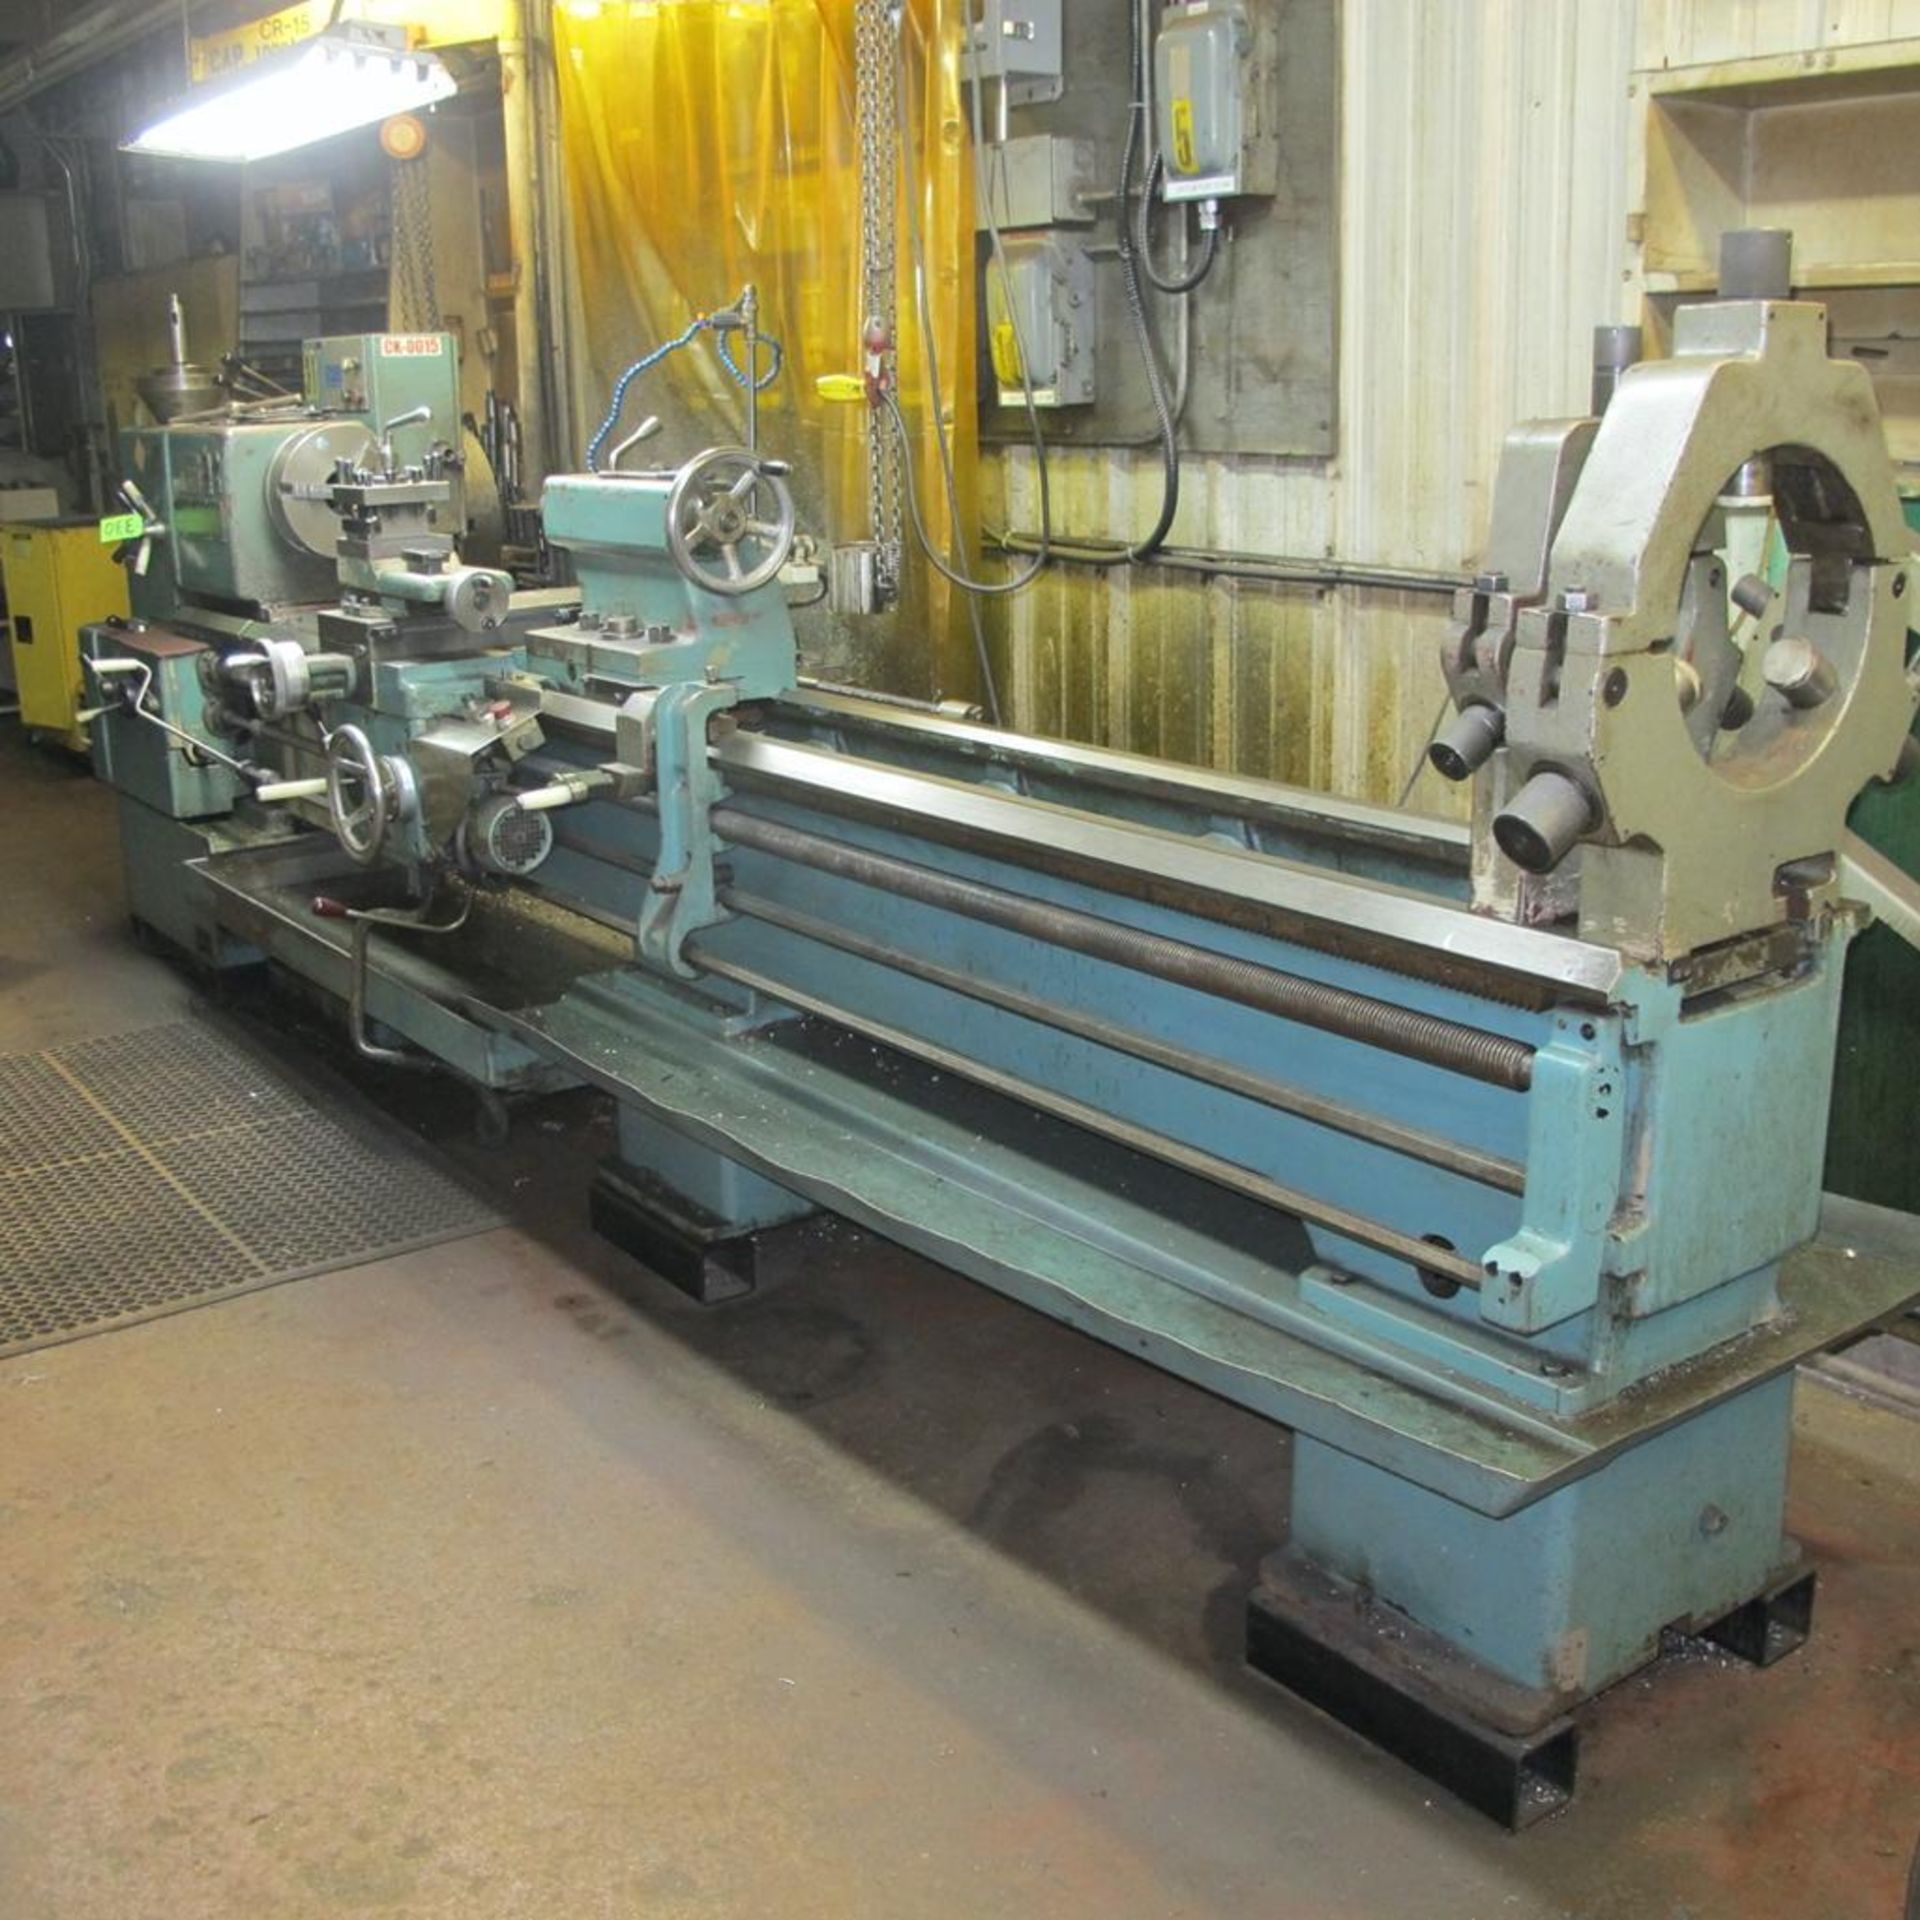 TOS LATHE MODEL SN 63 C, 28" X 120", 12" 3 JAW CHUCK, SPARE 20" 4 JAW CHUCK, 3" SPINDLE BORE, TOOL H